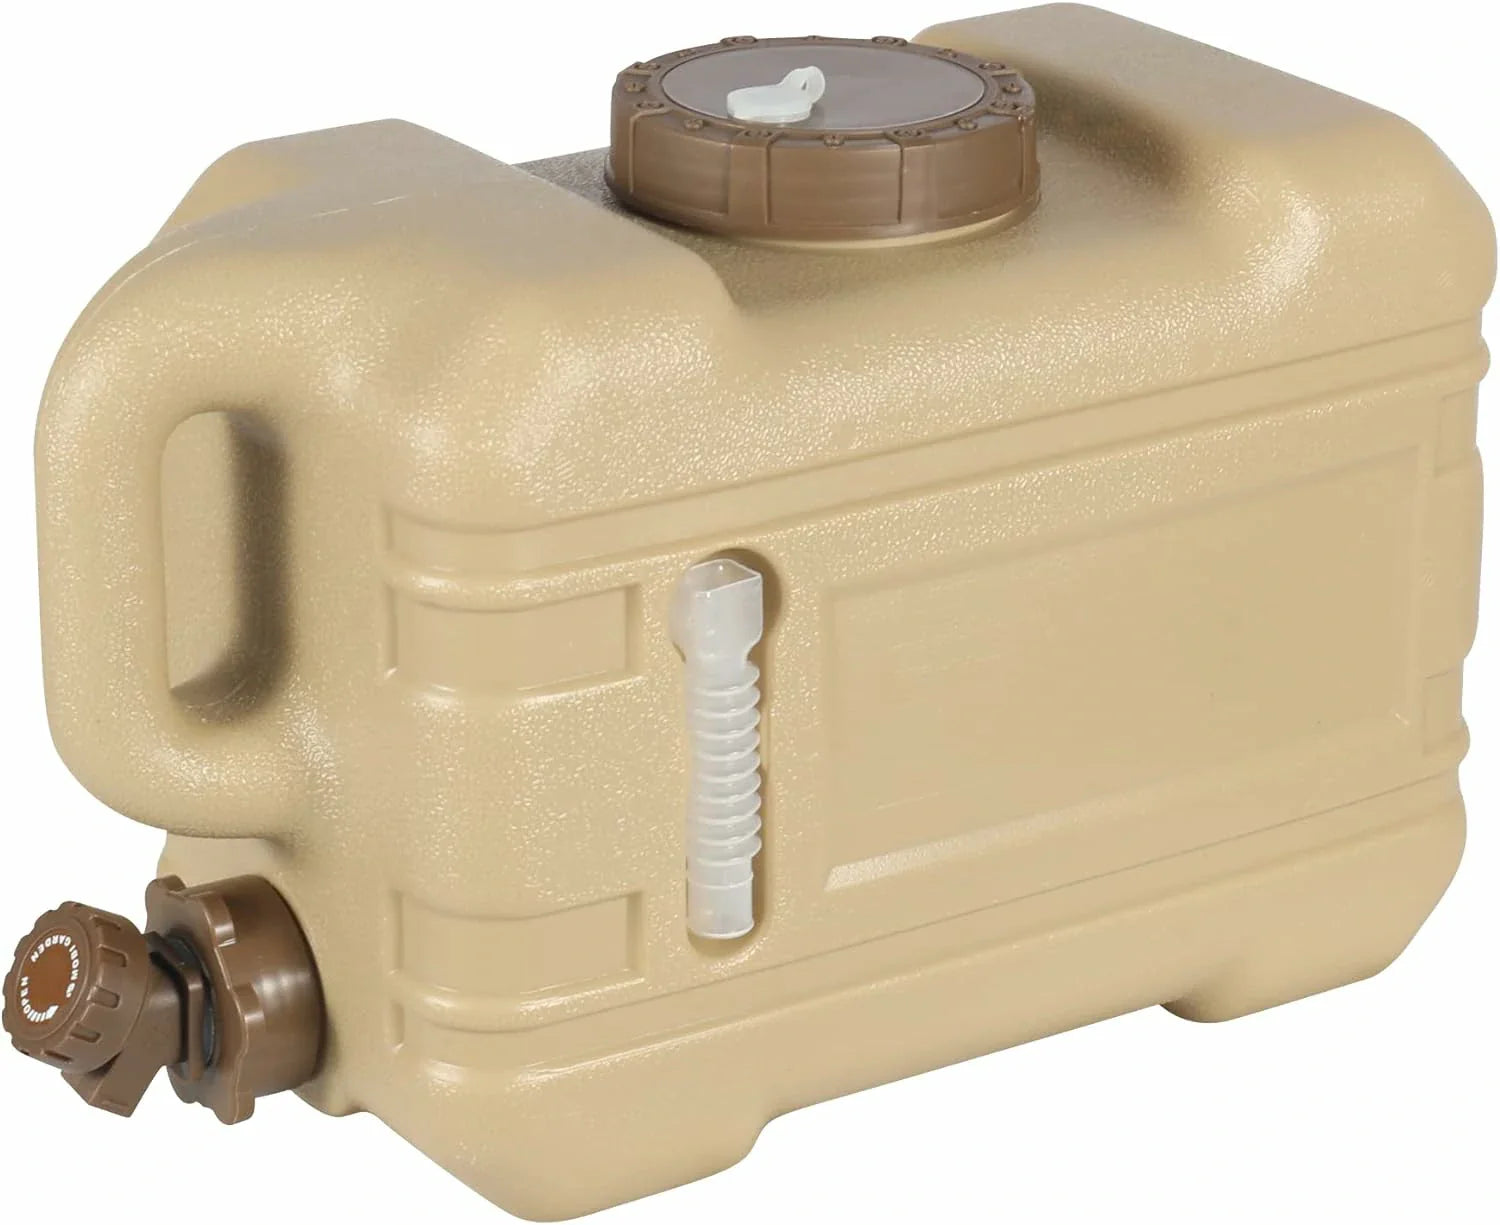 REDCAMP Portable Water Container with Spigot